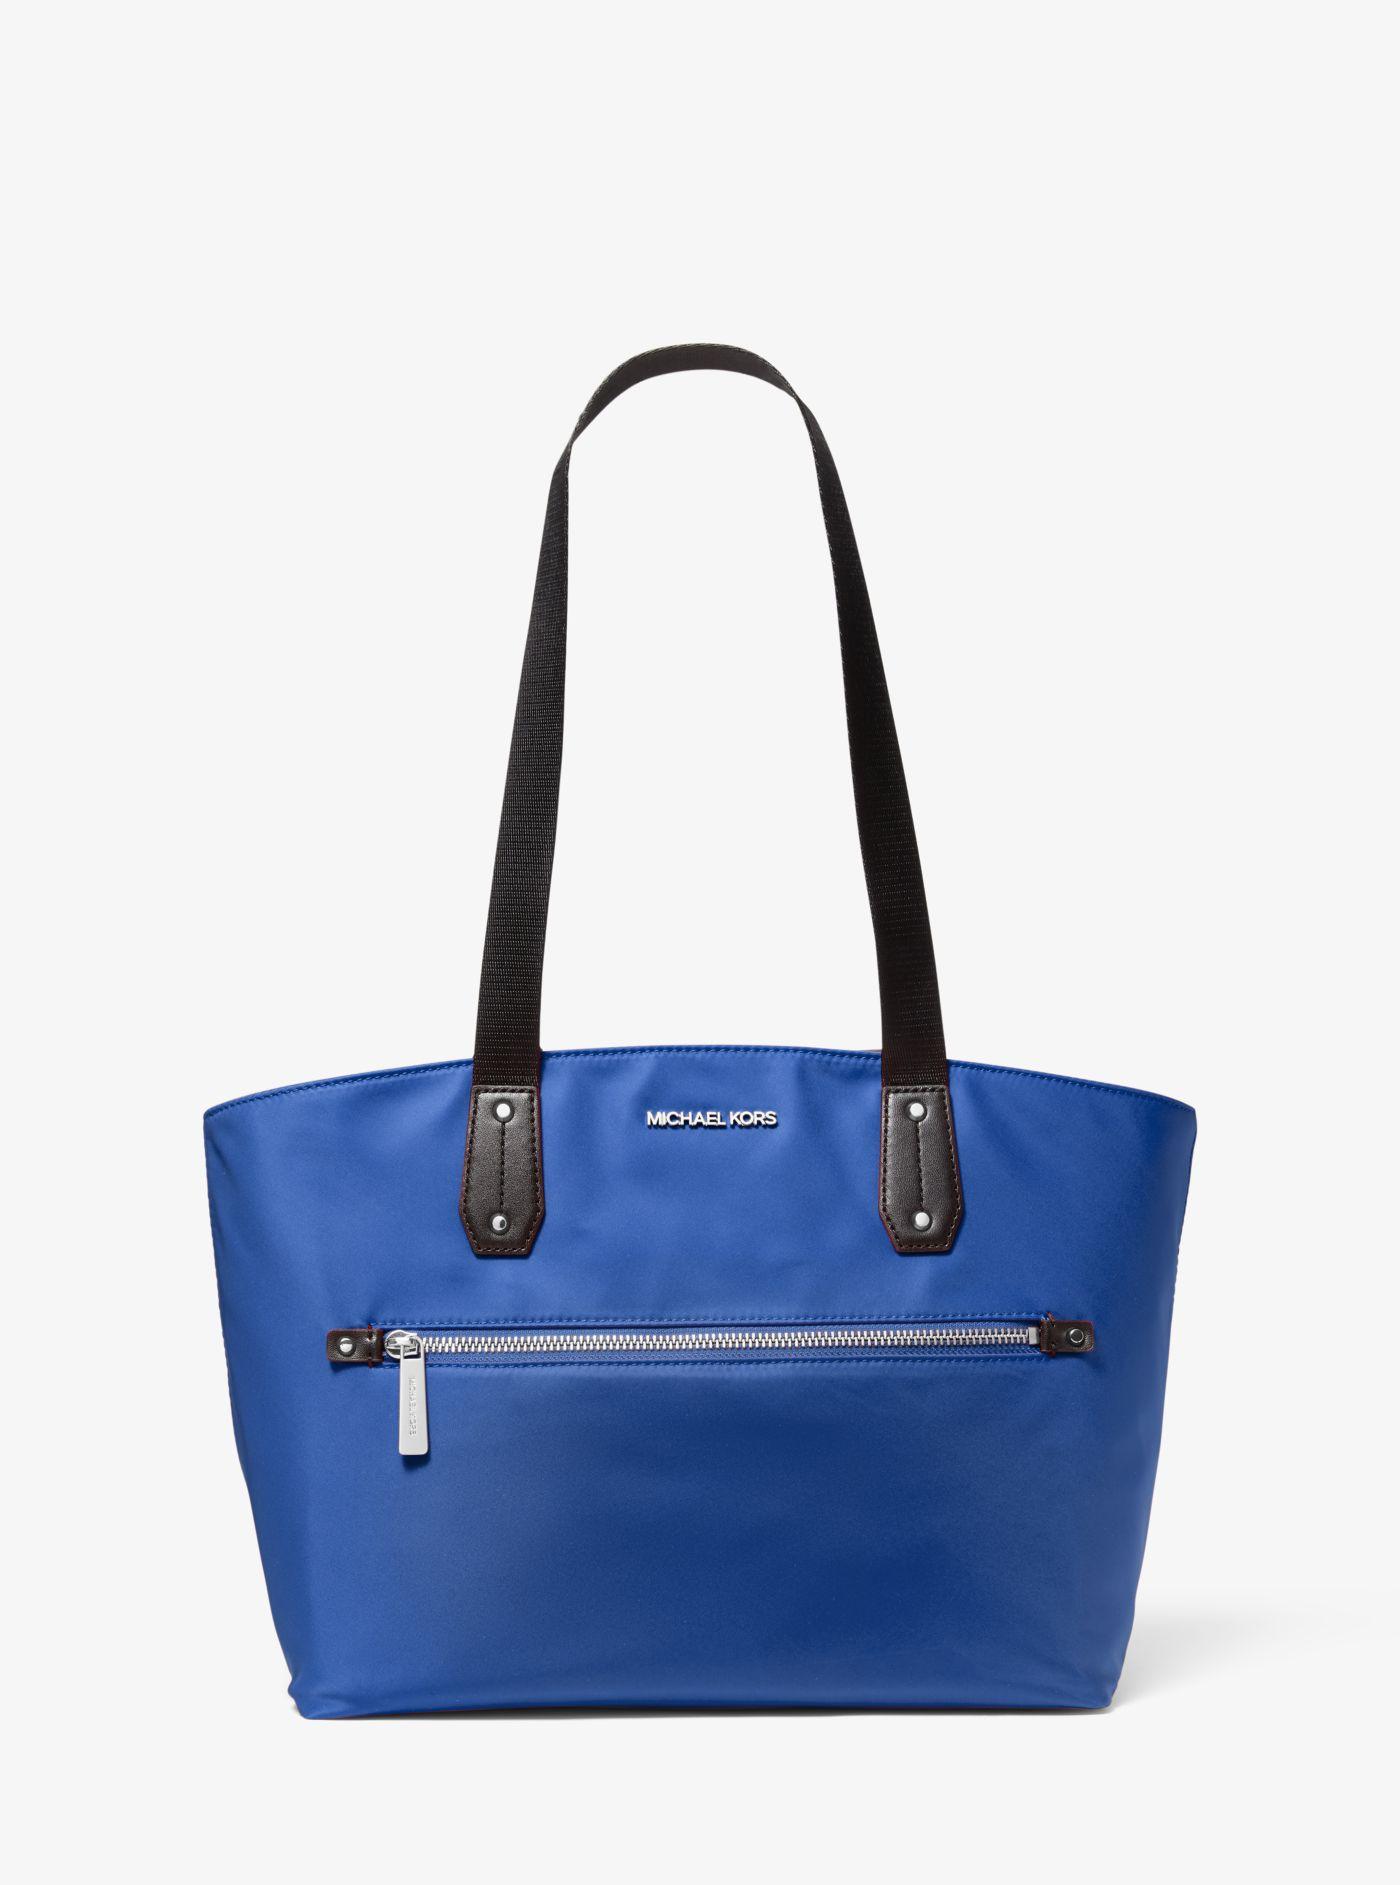 Michael Kors Synthetic Polly Medium Nylon Tote Bag in Electric Blue (Blue)  - Lyst